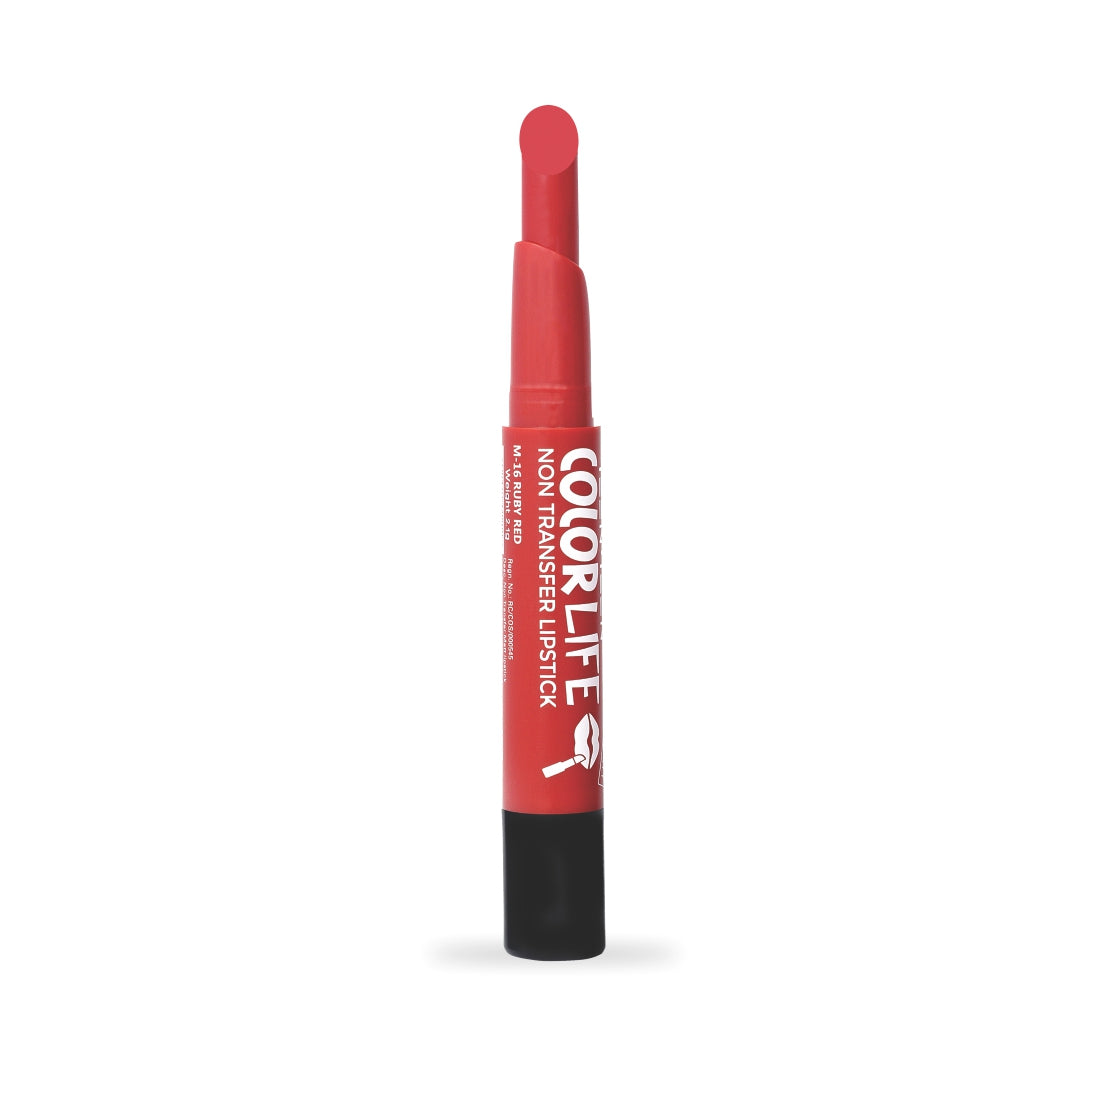 Teen.Teen Colorlife Non Transfer Lipstick - M16 Ruby Red